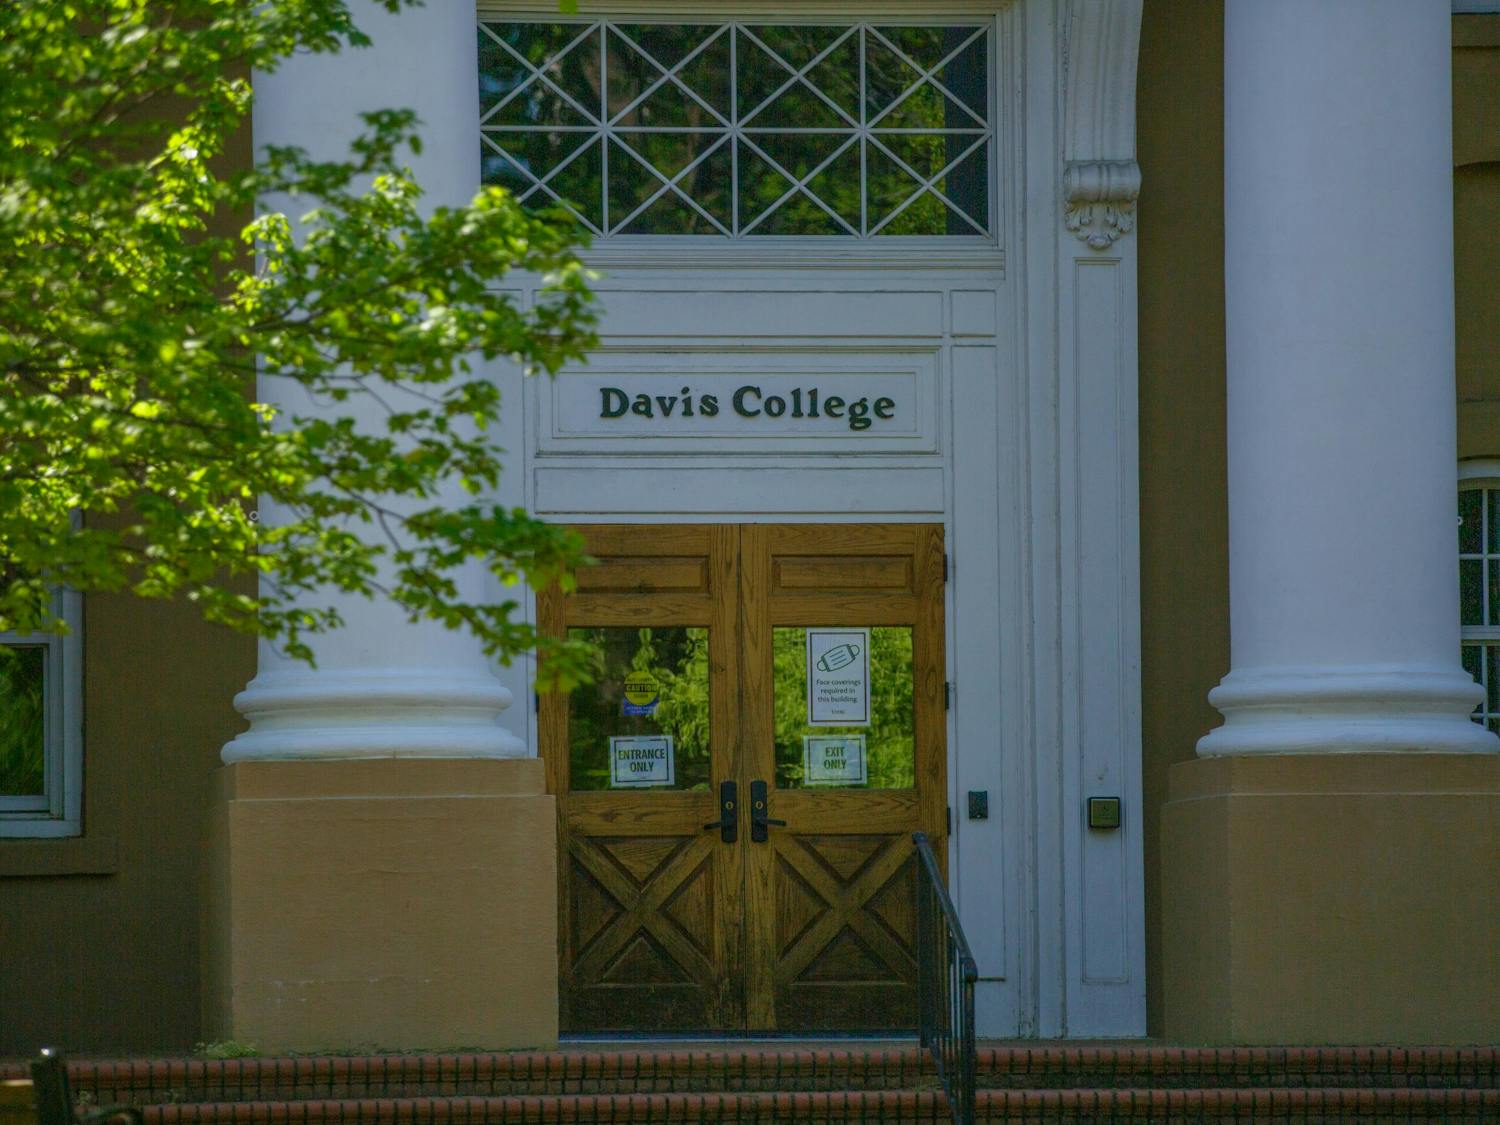 The event took place at Davis College. Davis College is one of the oldest buildings, located close to the Horseshoe at the University of South Carolina.&nbsp;
